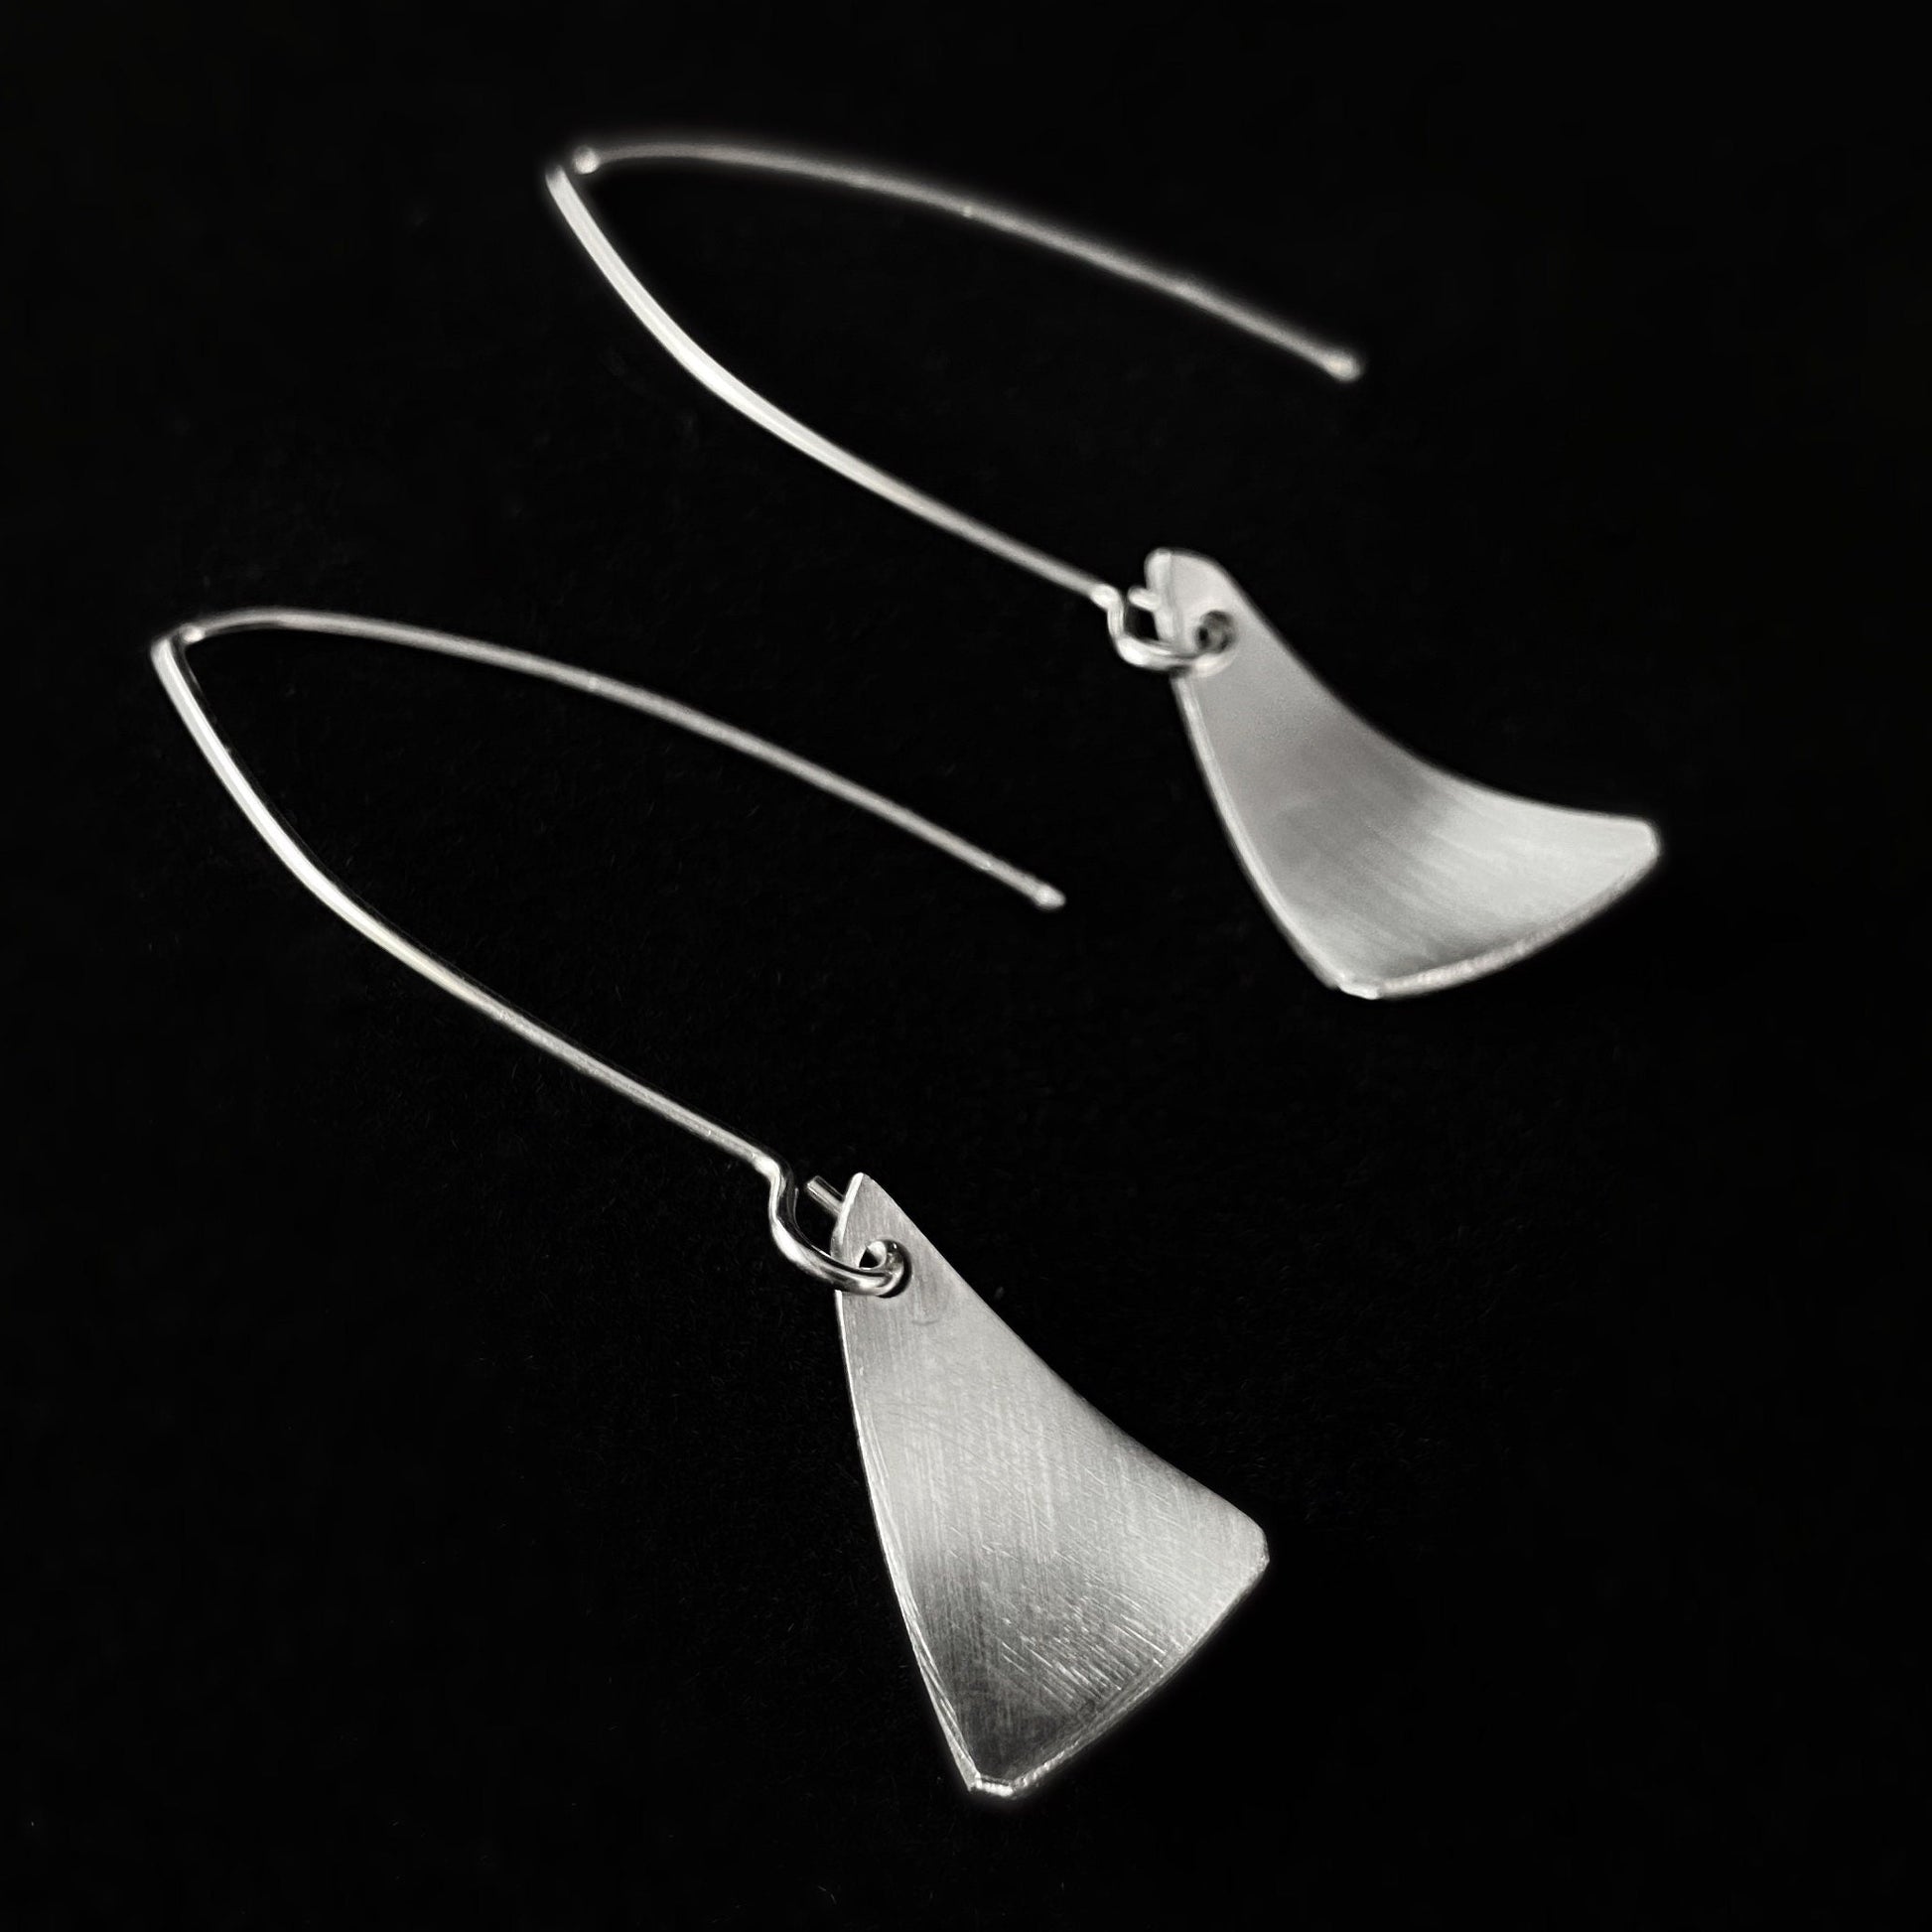 Silver Triangle/Sailboat Earrings, Handmade - Recycled Materials